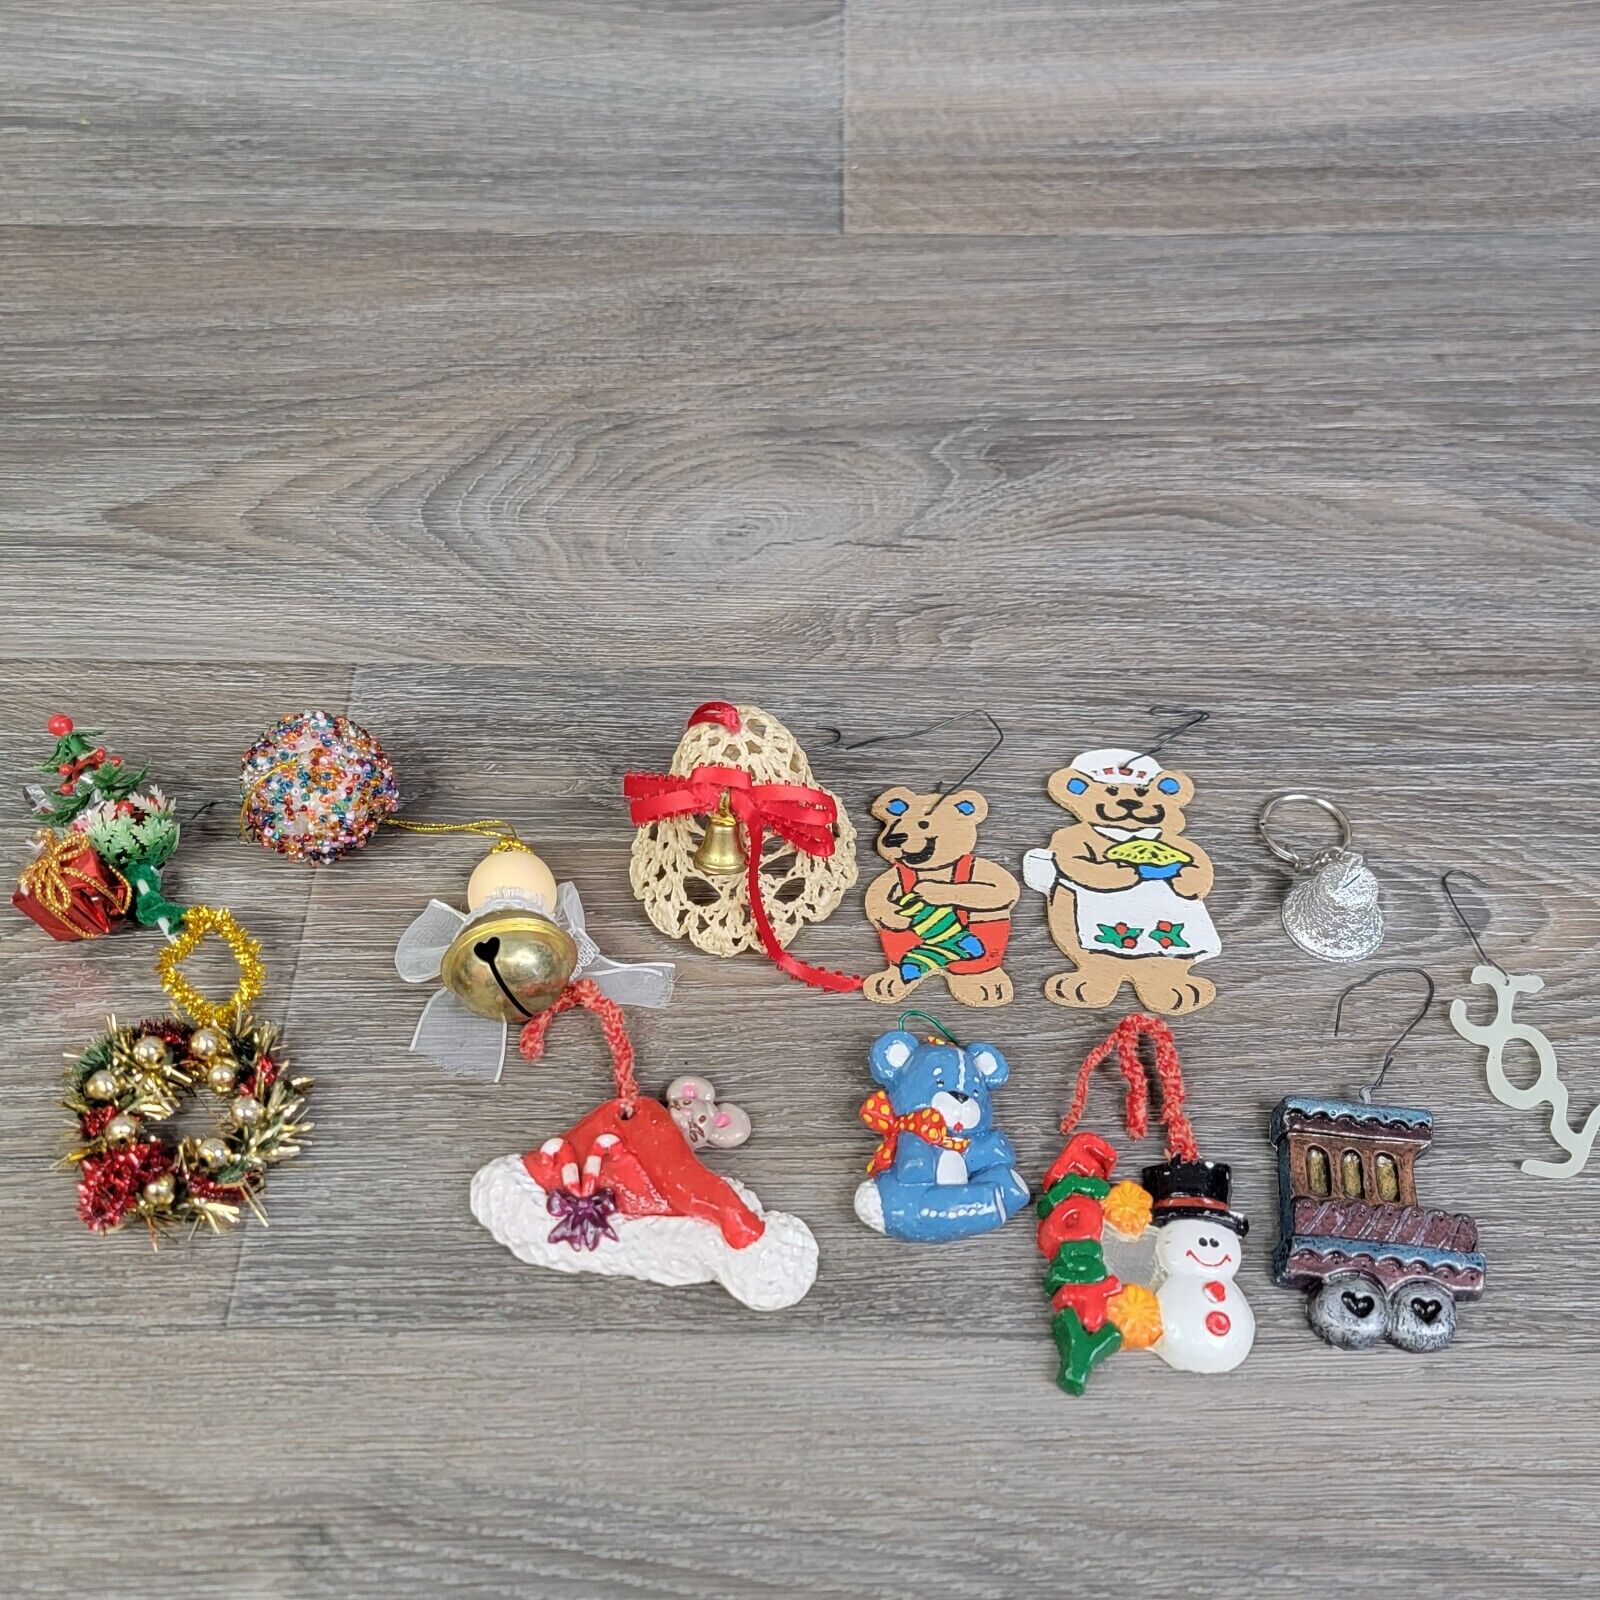 Vintage Christmas Ornament Lot of 14 Mixed Handmade Homemade Snowman Bell Mouse